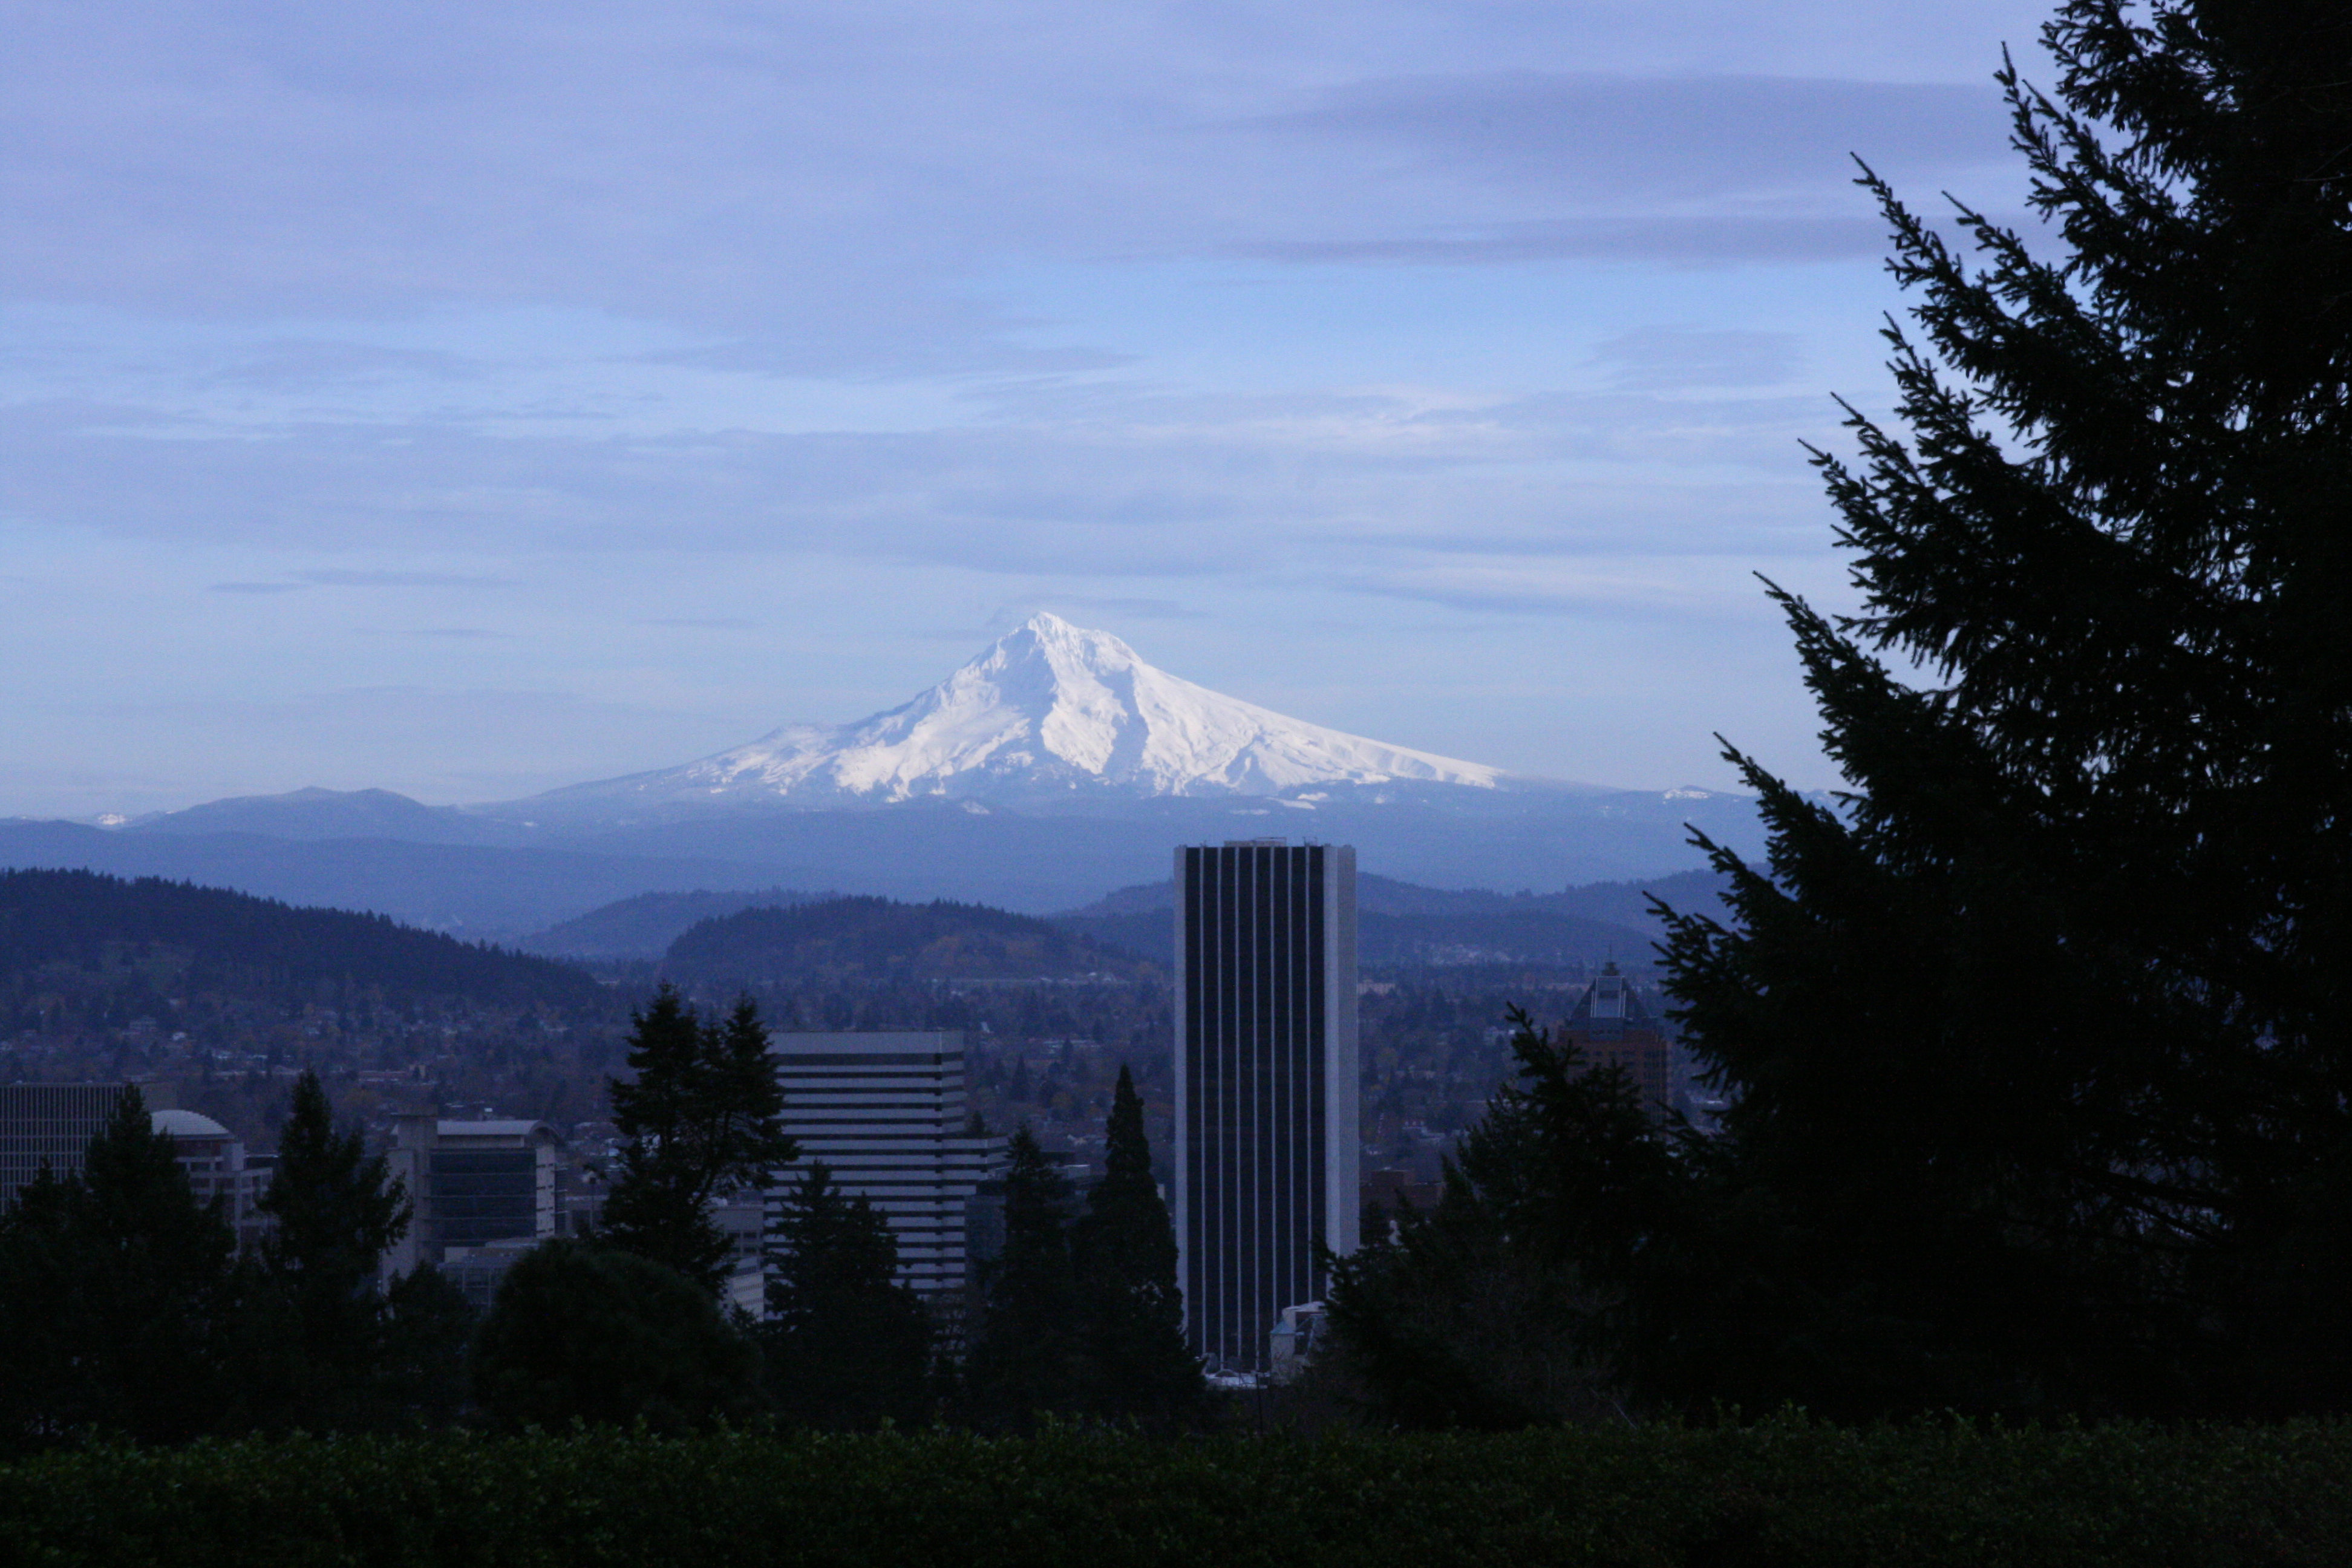 Mt Hood from the Japanese Garden